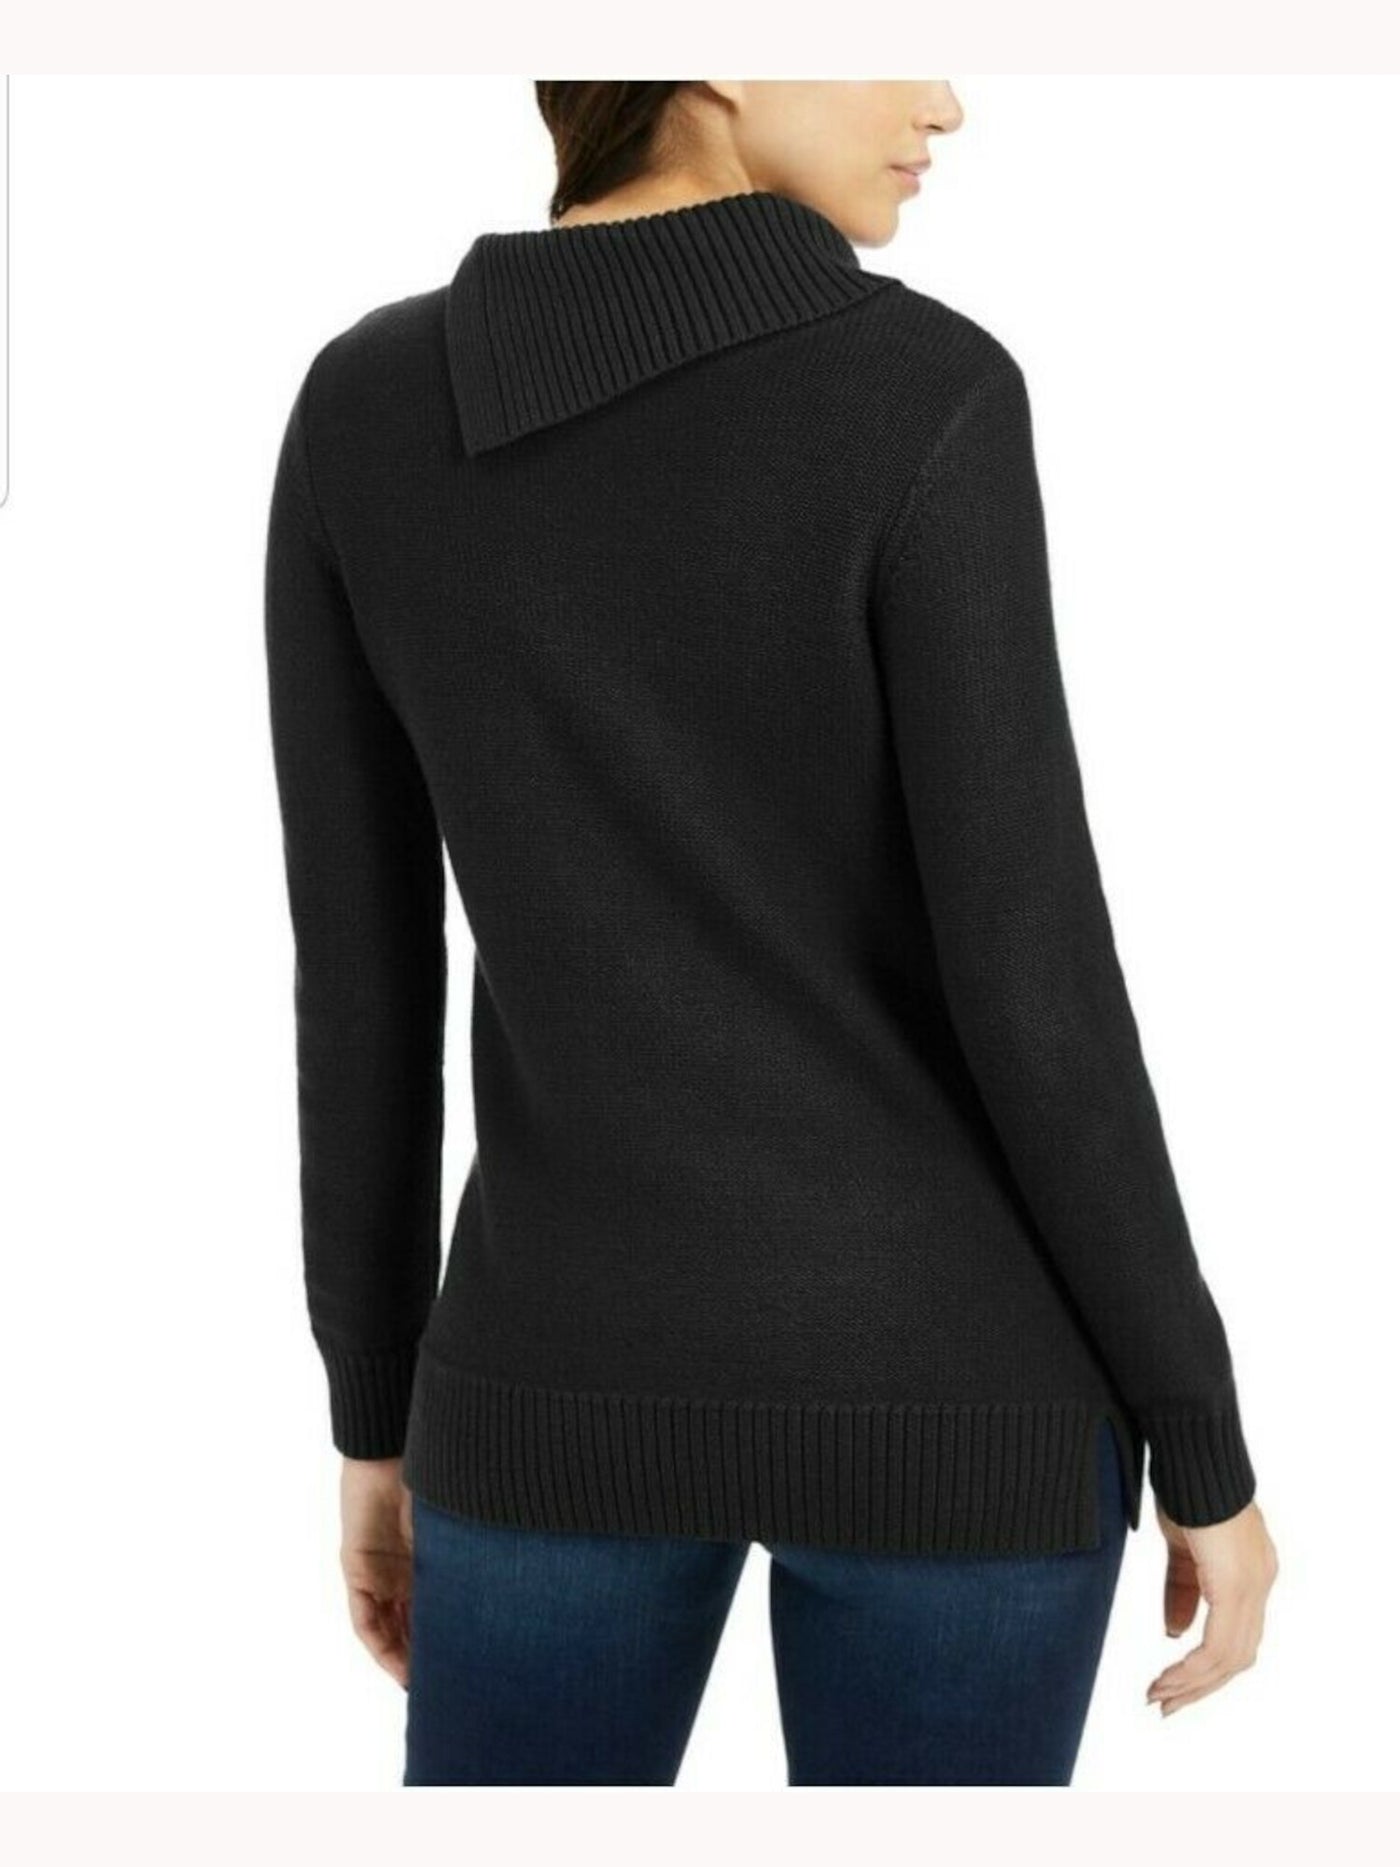 CHARTER CLUB Womens Black Ribbed Heather Long Sleeve Cowl Neck Sweater XXL